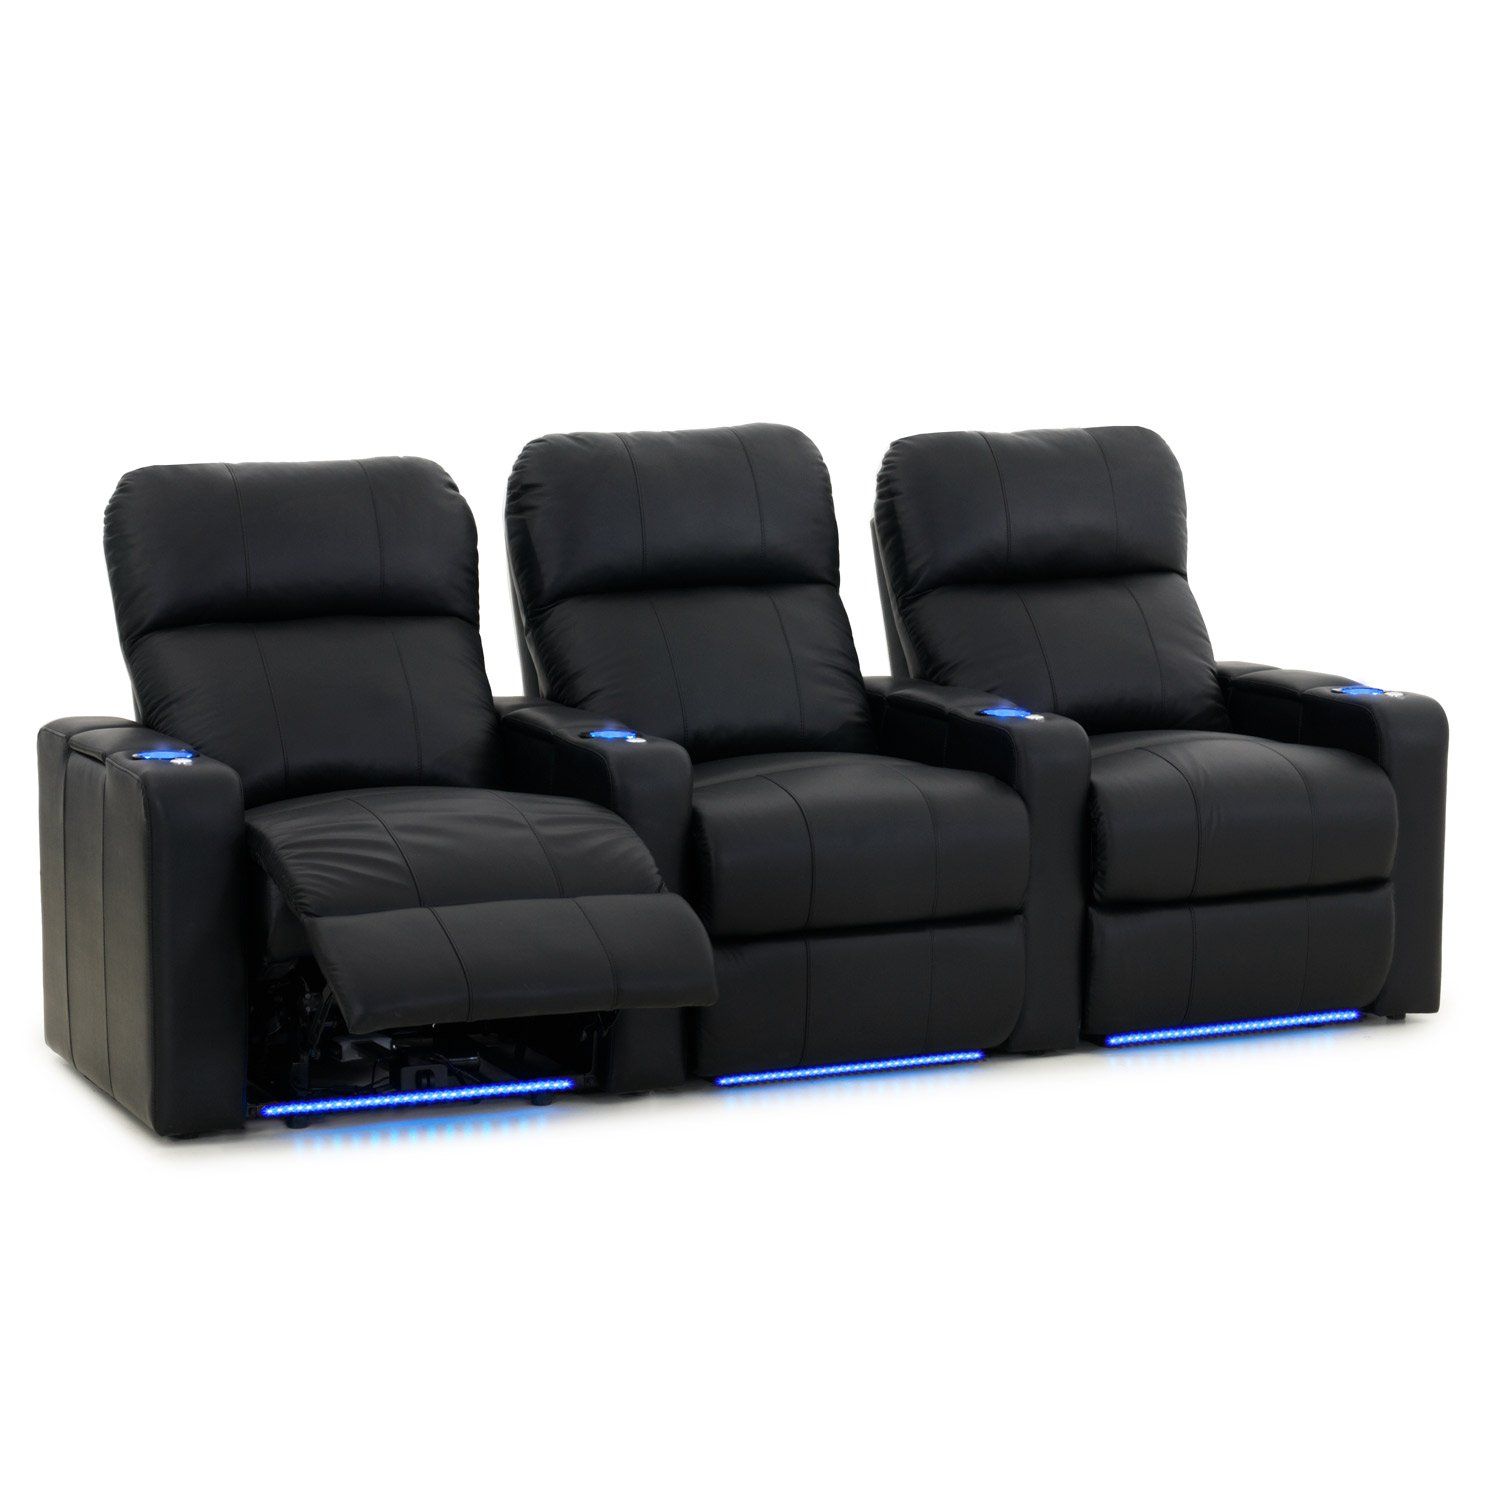 Octane Turbo XL700 Black Bonded Leather with Power Recline (Row of 3 Straight) | Amazon (US)